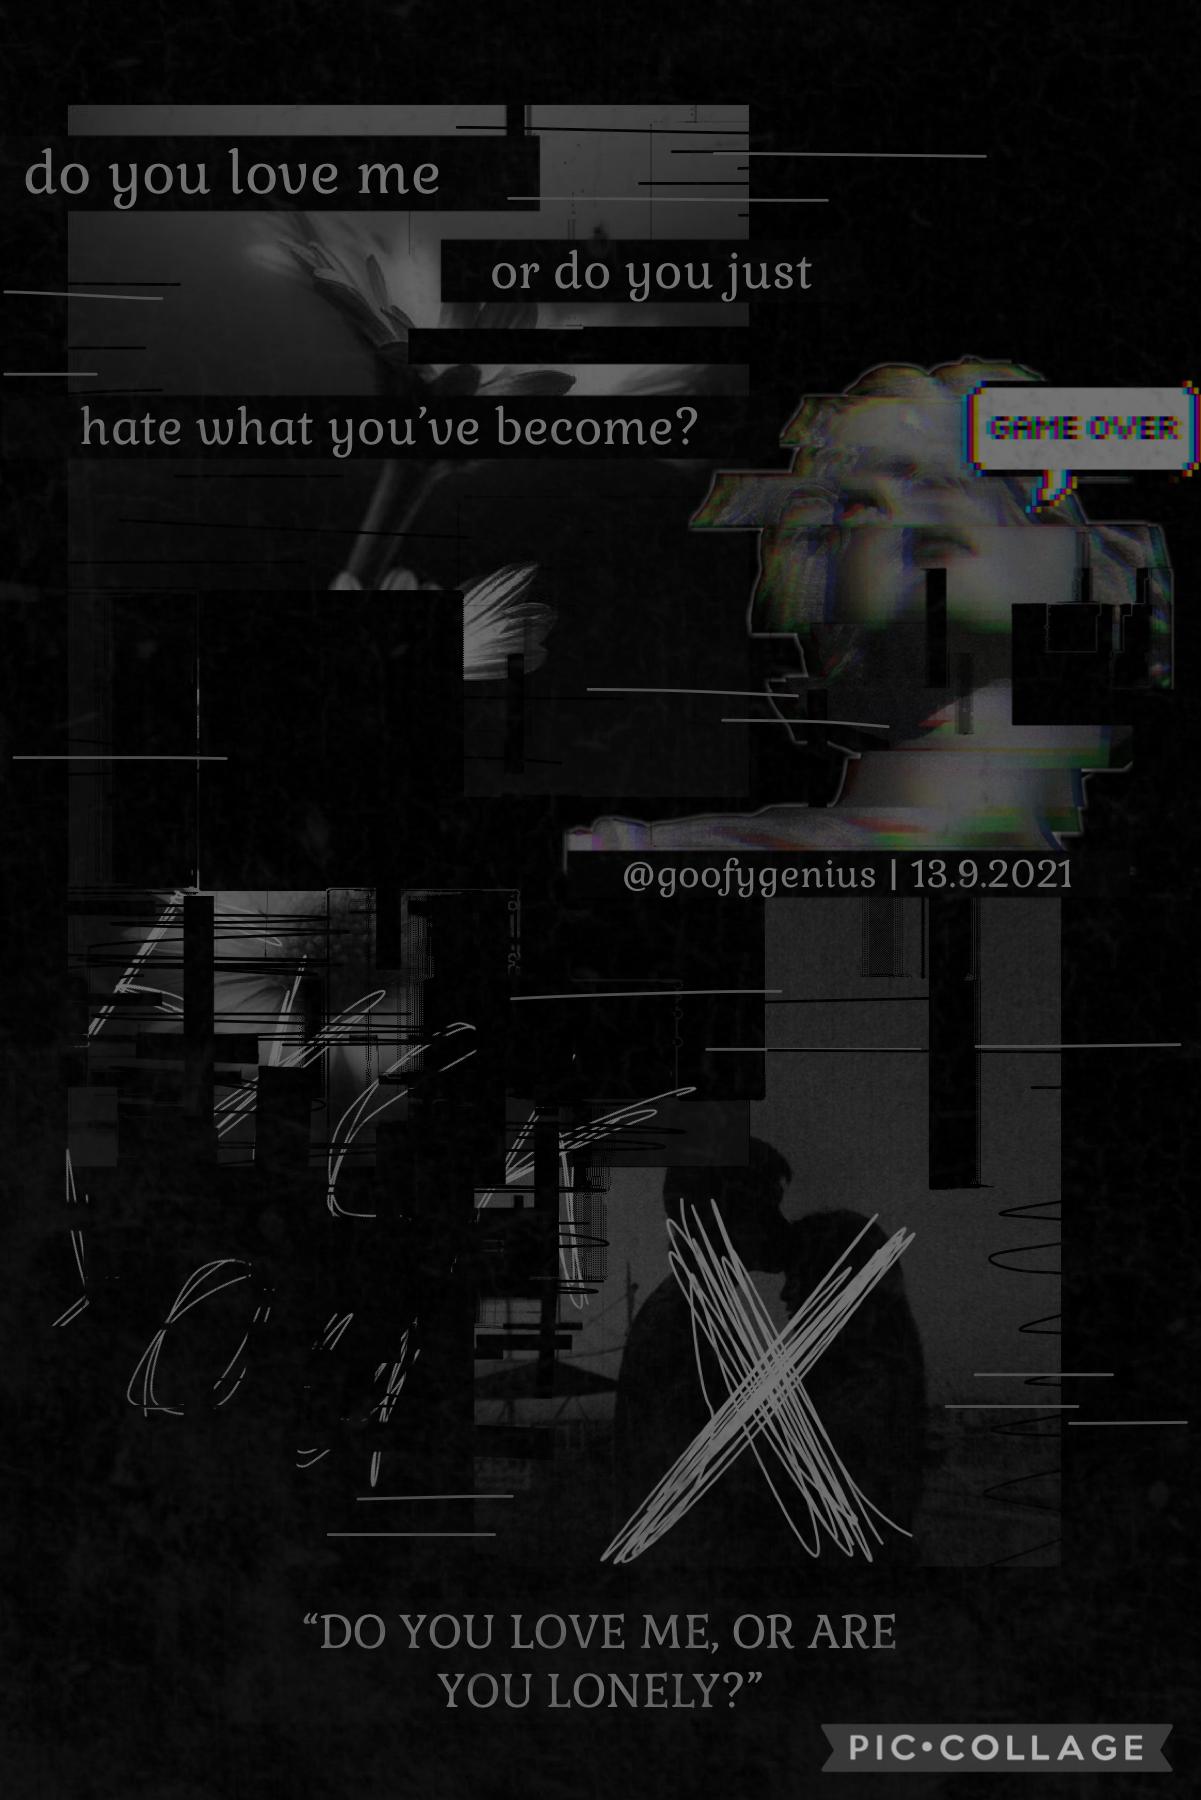 ⚙️Tap Here⚙️ [remixes for backstory]
been in an ✨edgy✨ mood lately, must be school 🥴 I hope pc doesn’t take this down, and I added a lot of pngs over tHe WoRd so the system doesn’t catch it... sorry in advance to y’all who don’t like strong language O.o i